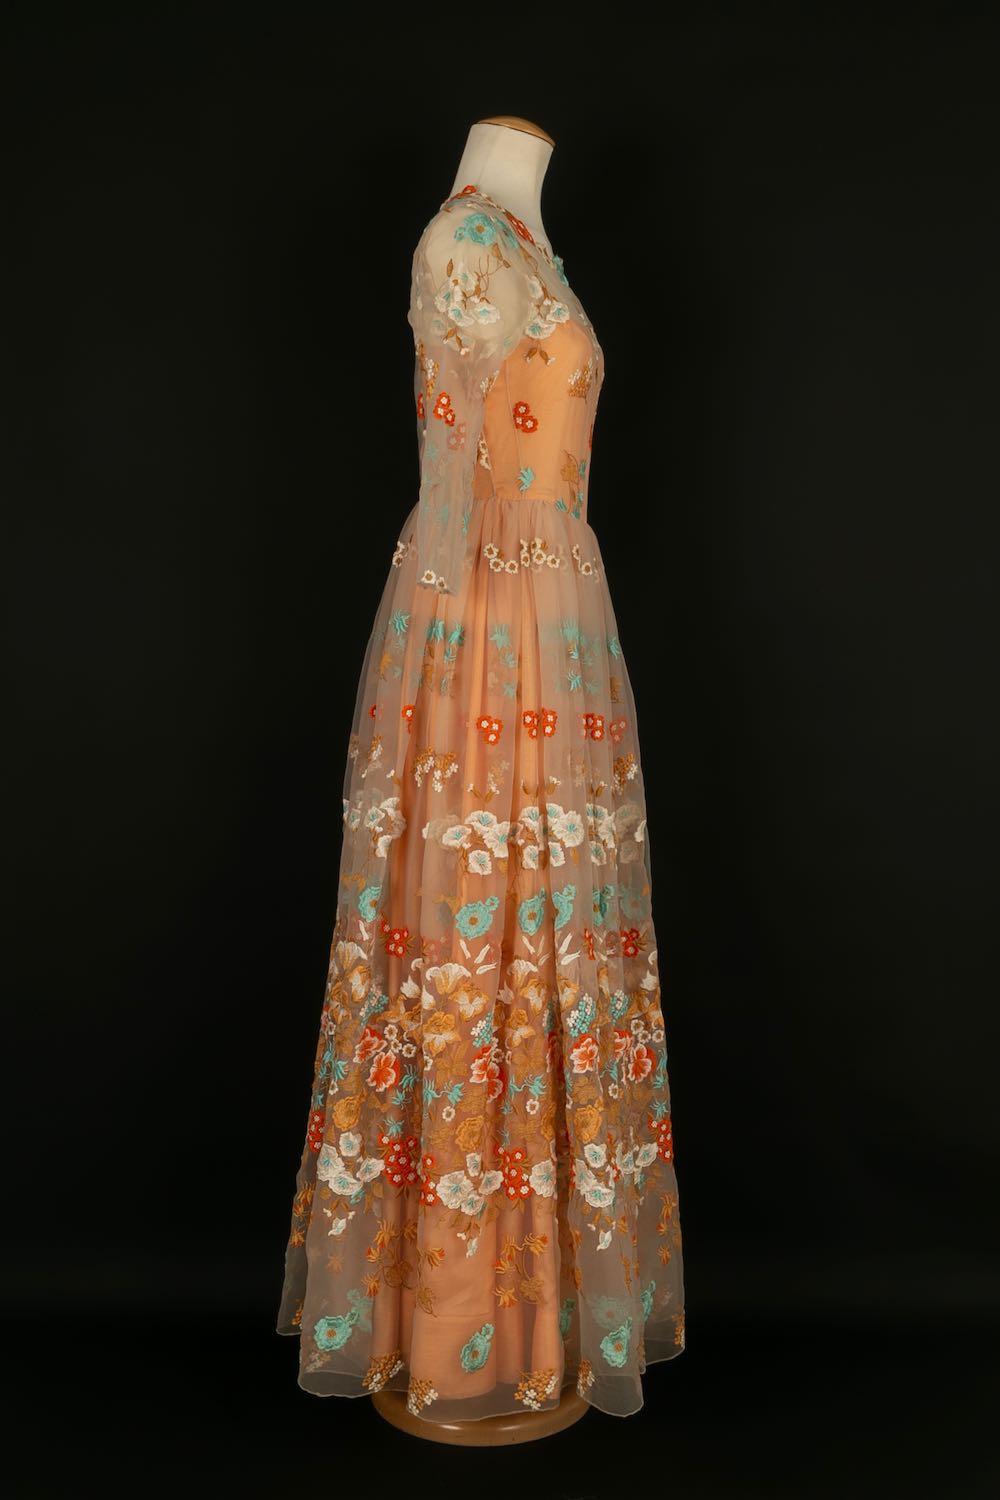 CHANEL - Silk and organza dress embroidered with flowers in shades of orange. No size label or composition, it fits a 36FR. Haute Couture Spring-Summer 1972 collection.

Condition:
Good condition

Dimensions:
Chest: 36 cm - Waist: 34 cm - Sleeve